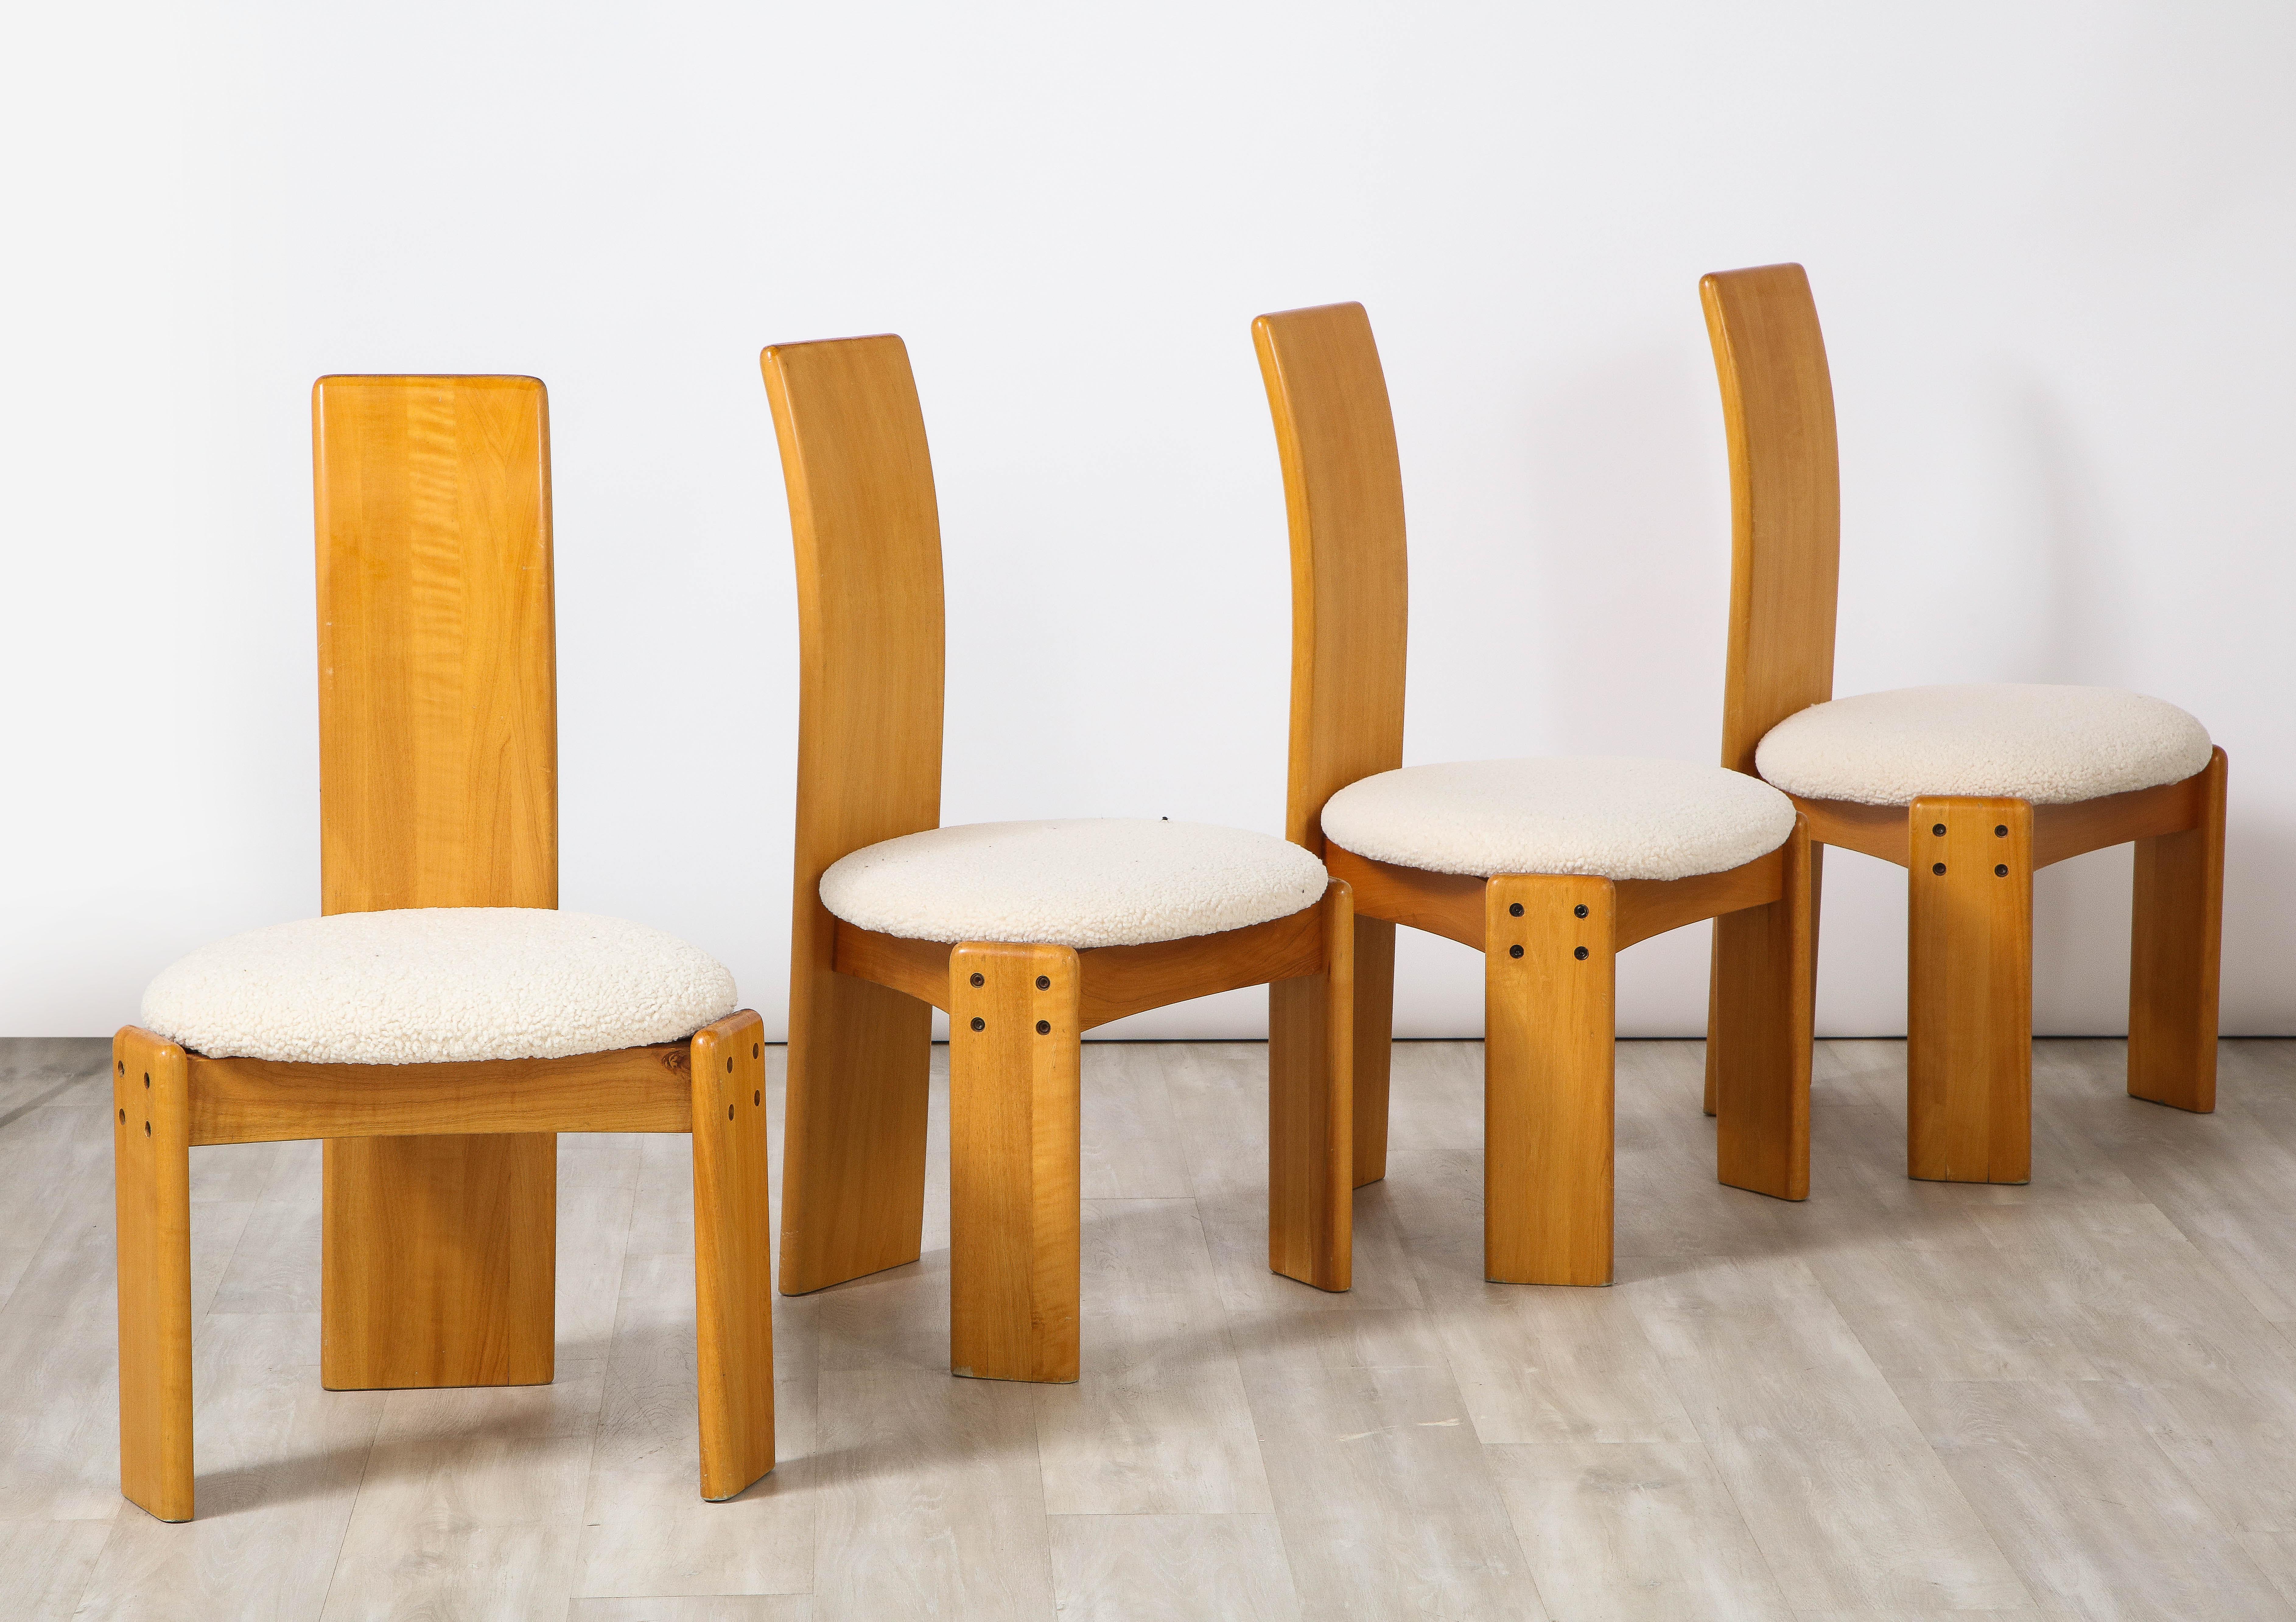 Afra and Tobia Scarpa Set of Four Dining Chairs, circa 1960 For Sale 4